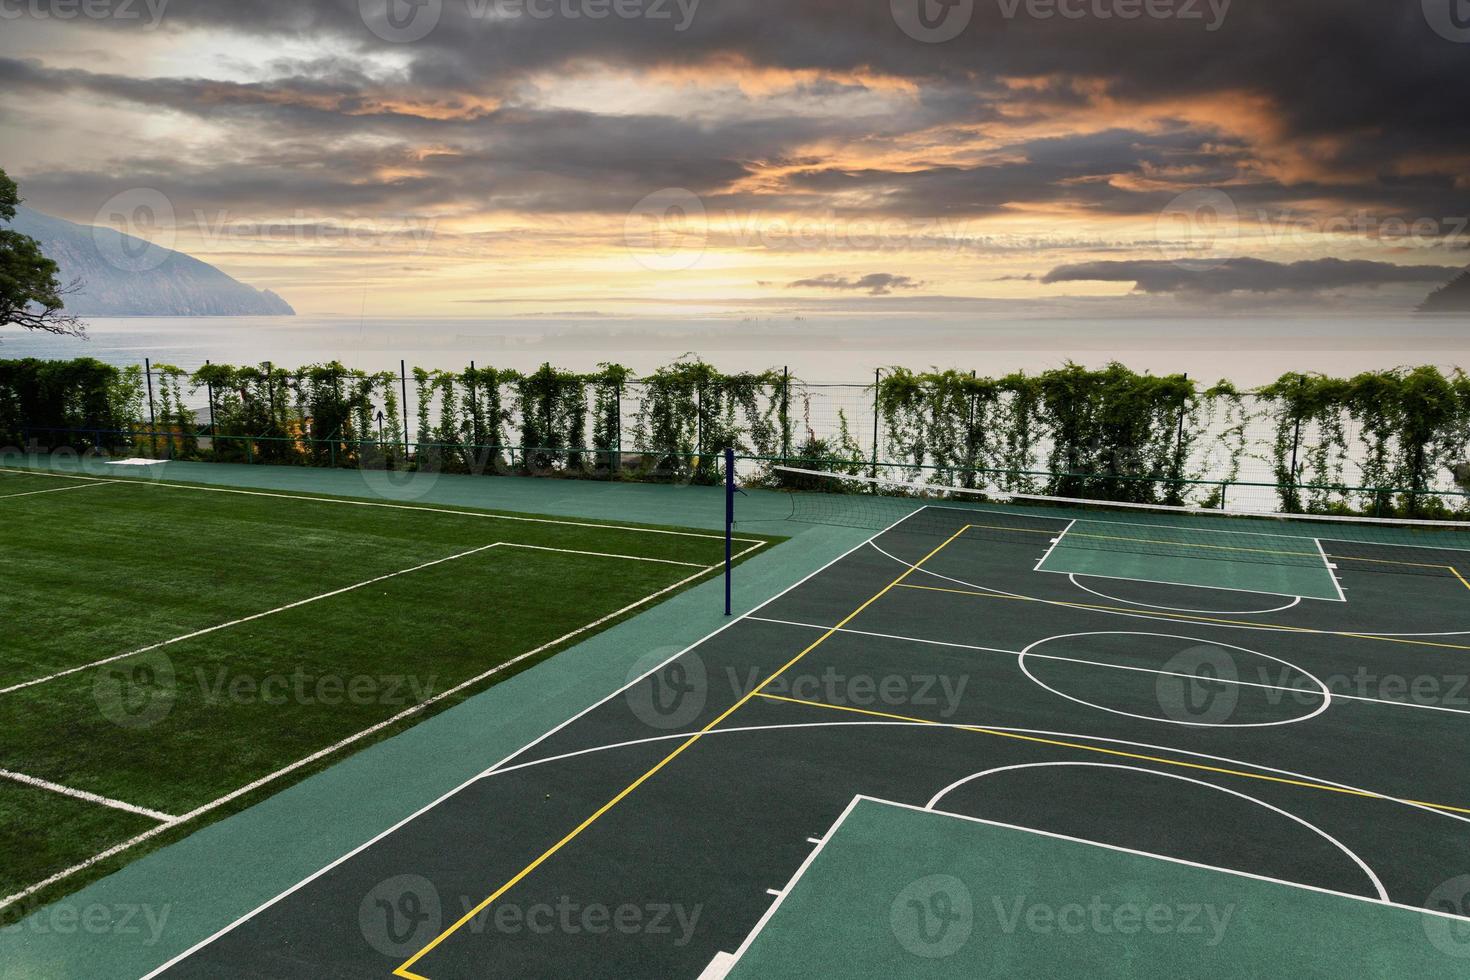 Outdoor Volleyball court with a net in the morning next to the sea. photo